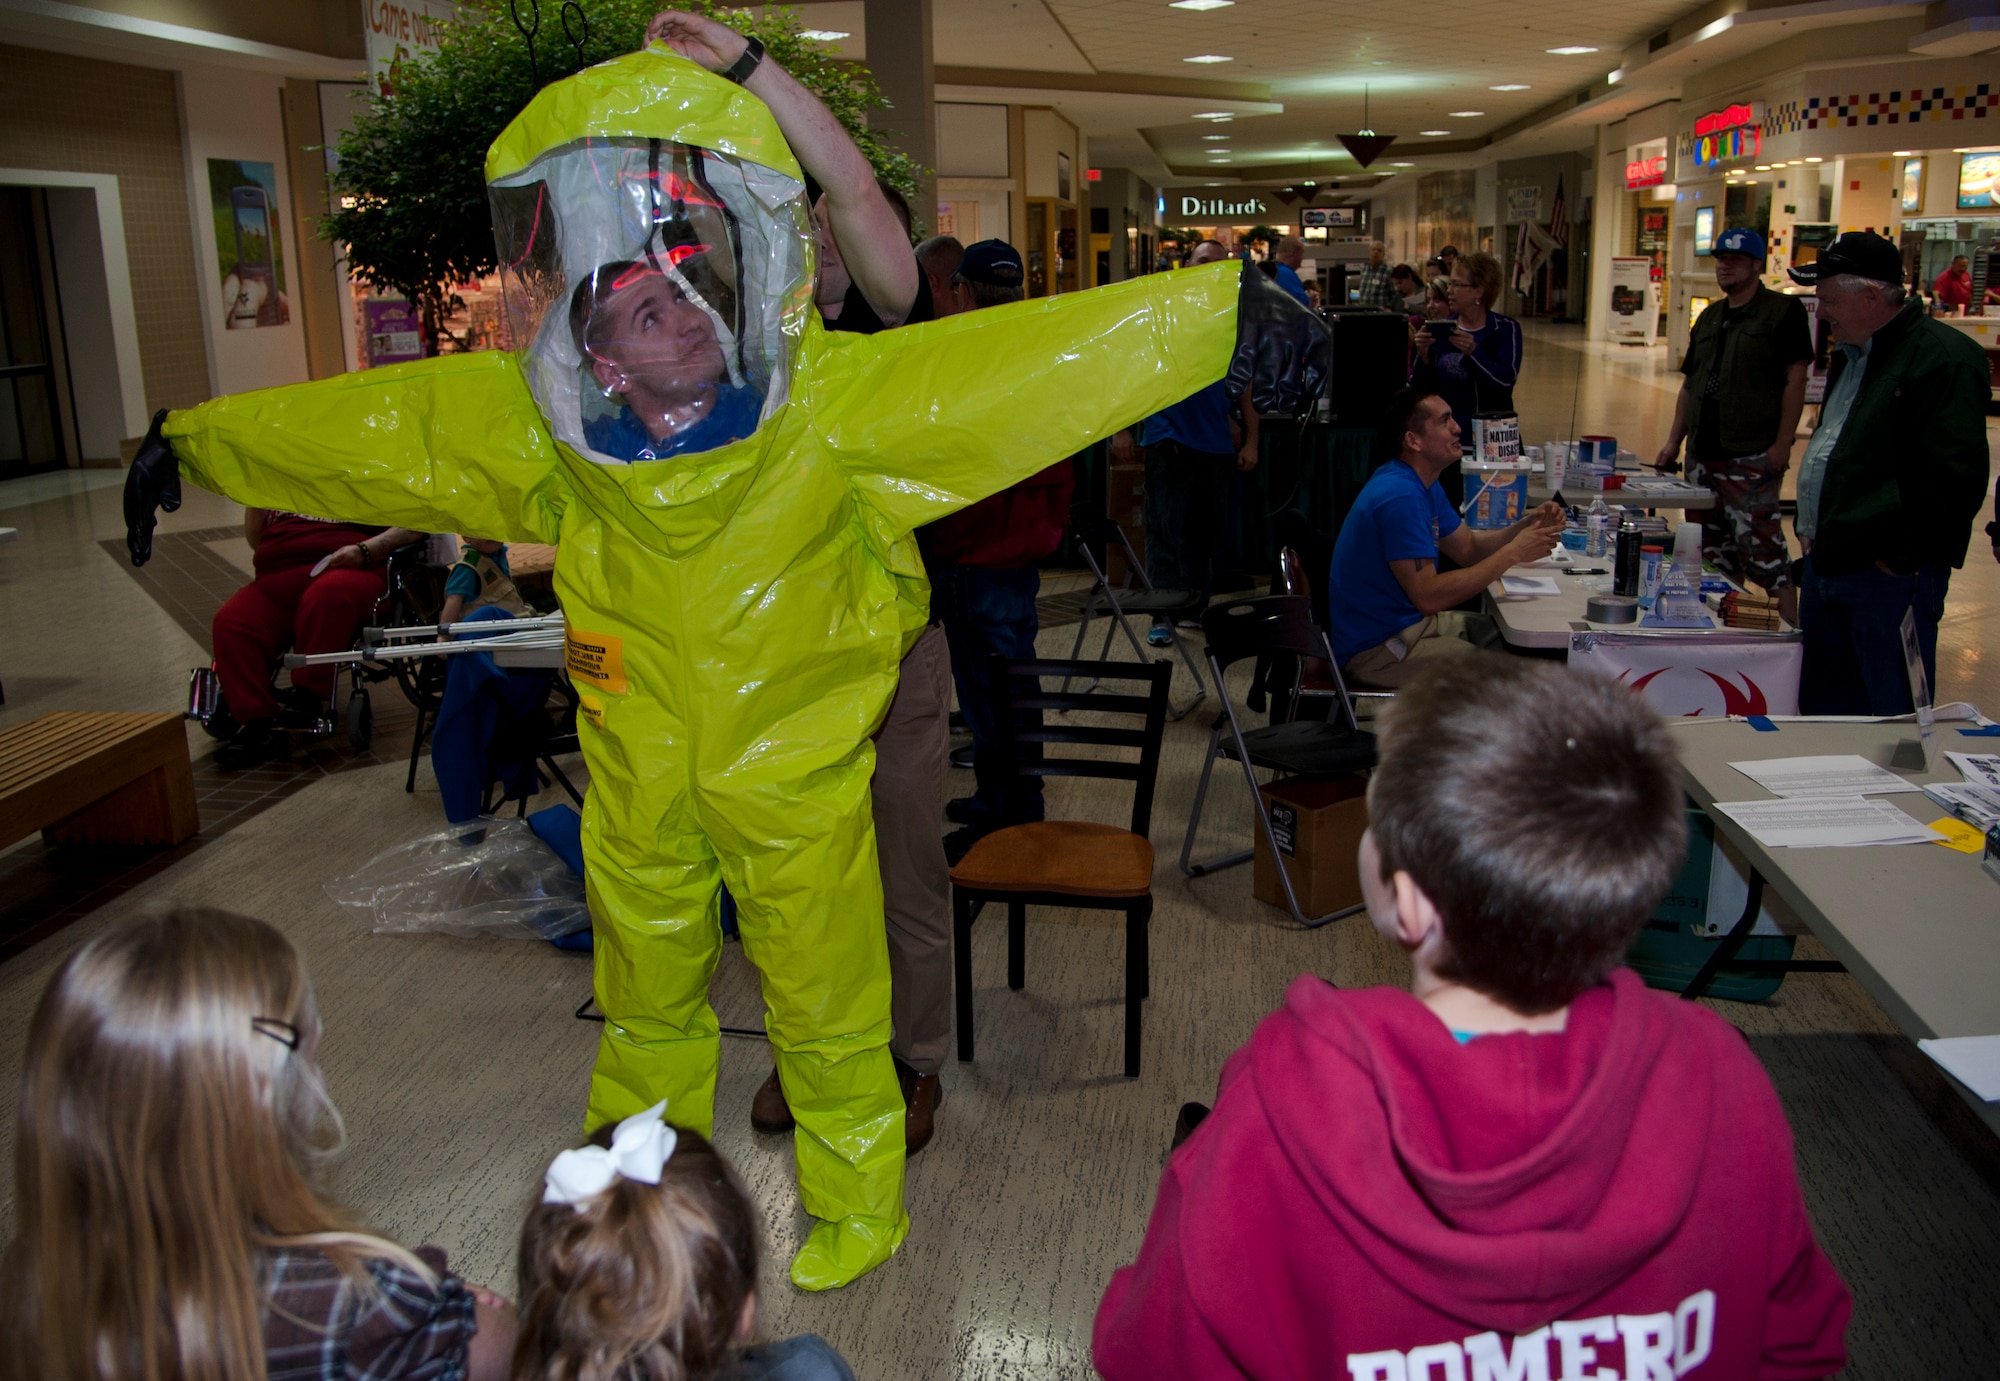 Senior Airman Zachary Paskovitch, a 71st Logistics Readiness Squadron Emergency Management Flight emergency management journeyman, dons a hazmat suit during the 4th Annual Weather and Disaster Preparedness Day April 8 at the Oakwood Mall in Enid, Oklahoma. The Airmen joined emergency management personnel from across Garfield County to hand out preparedness information to the local community. (U.S. Air Force Photo/Staff Sgt. Nancy Falcon)